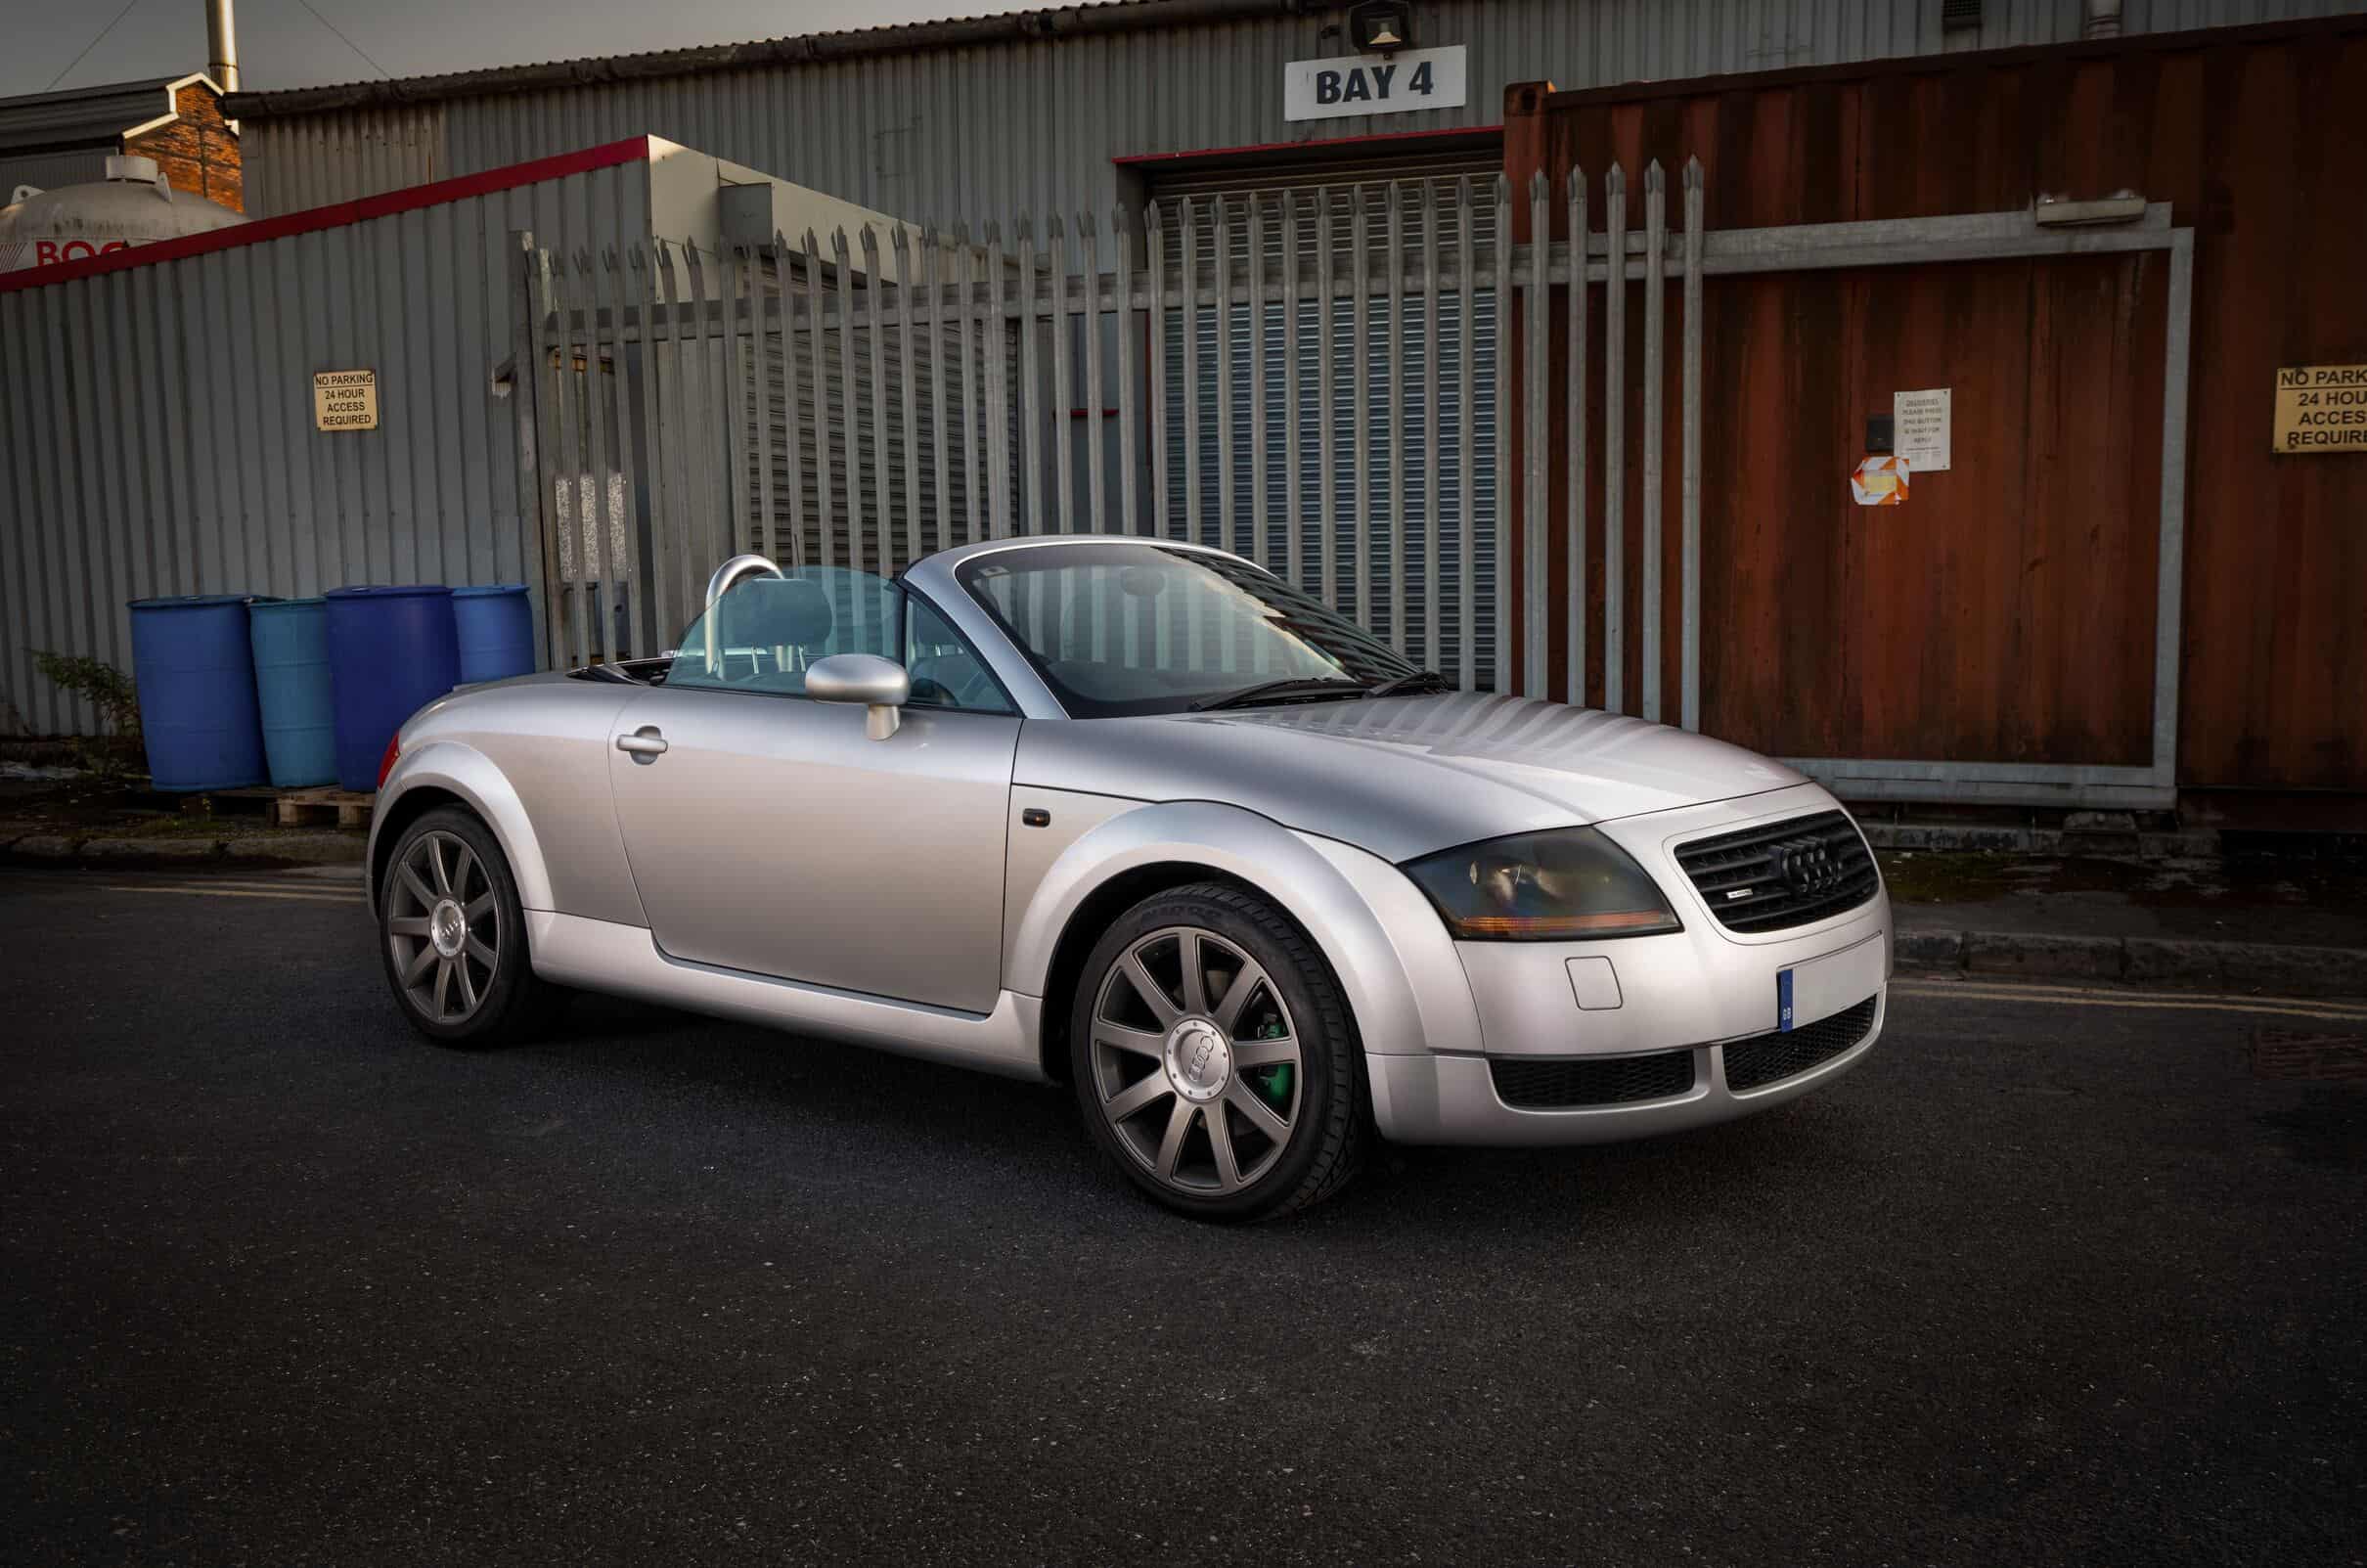 A silver Audi TT coupe parked in an urban setting, highlighting its sleek lines and modern design features.